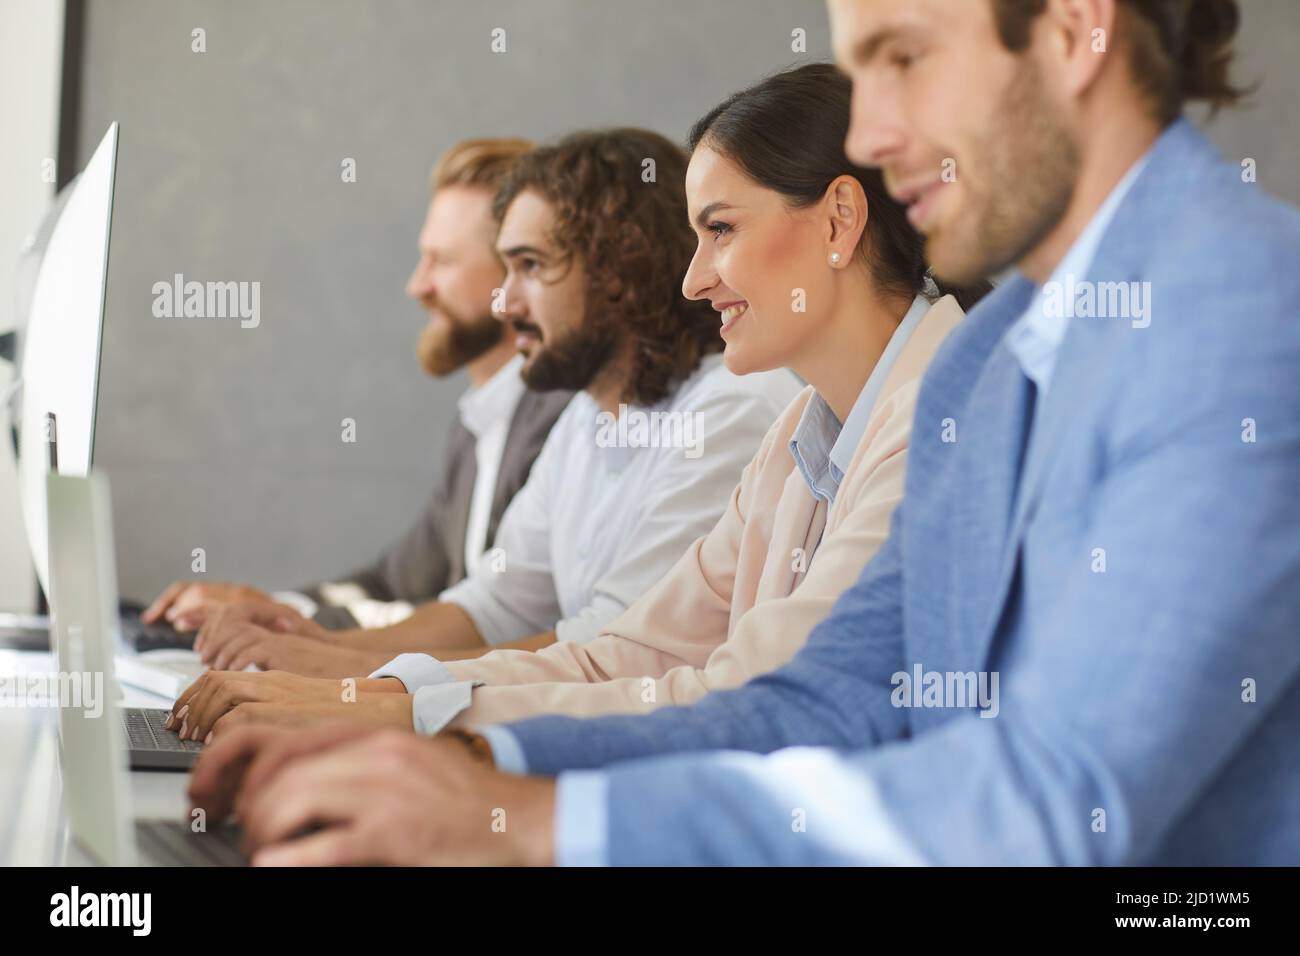 Side view of group of business people sitting at office desk and working on computers Stock Photo